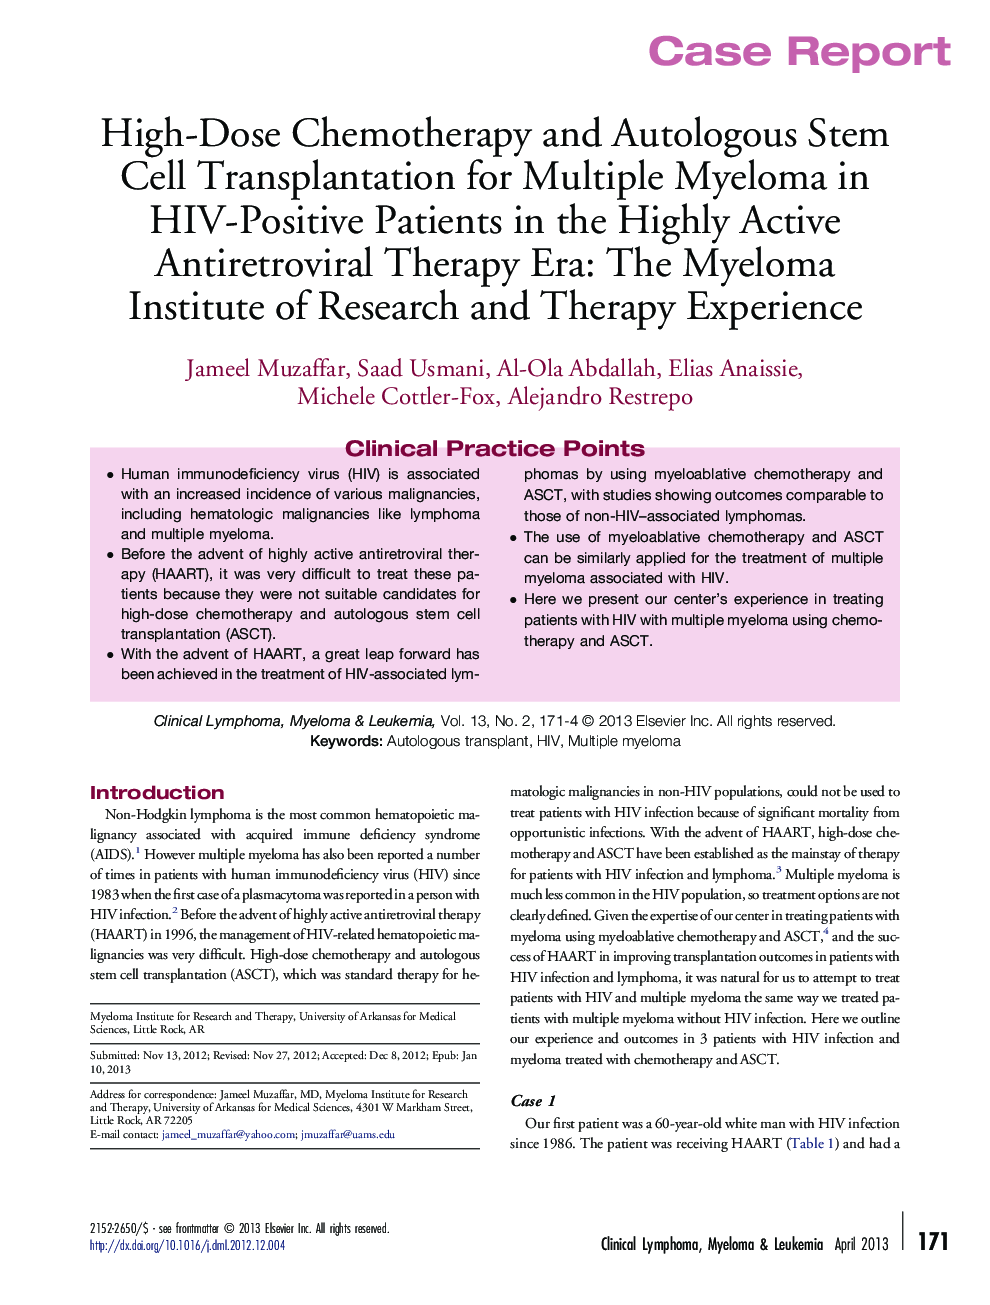 High-Dose Chemotherapy and Autologous Stem Cell Transplantation for Multiple Myeloma in HIV-Positive Patients in the Highly Active Antiretroviral Therapy Era: The Myeloma Institute of Research and Therapy Experience